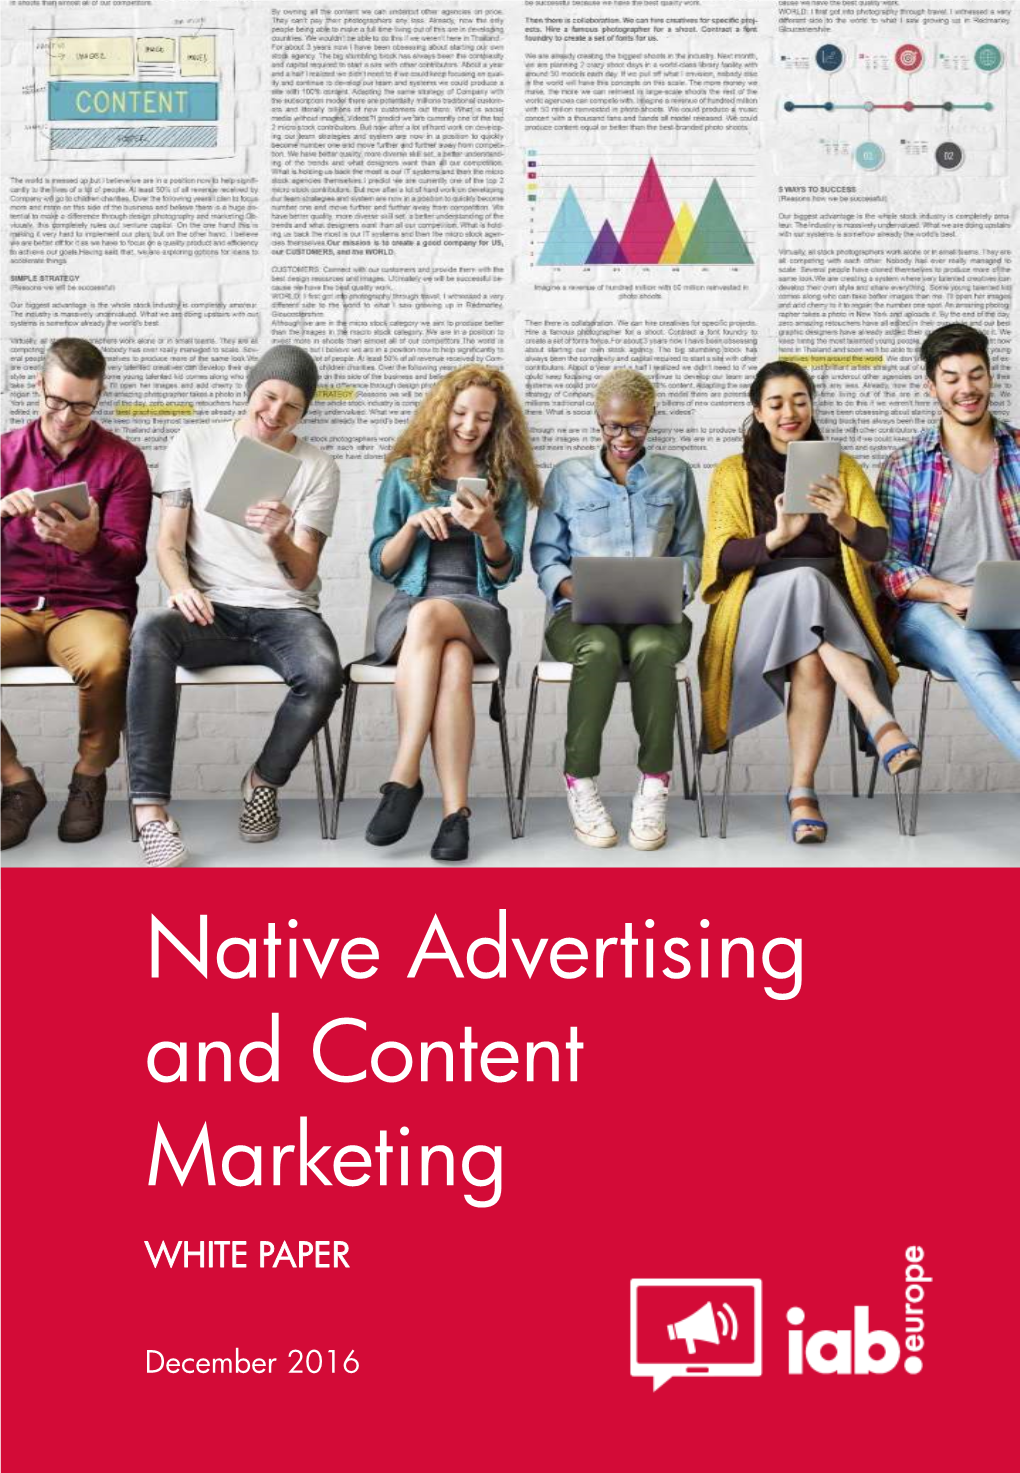 Native Advertising and Content Marketing